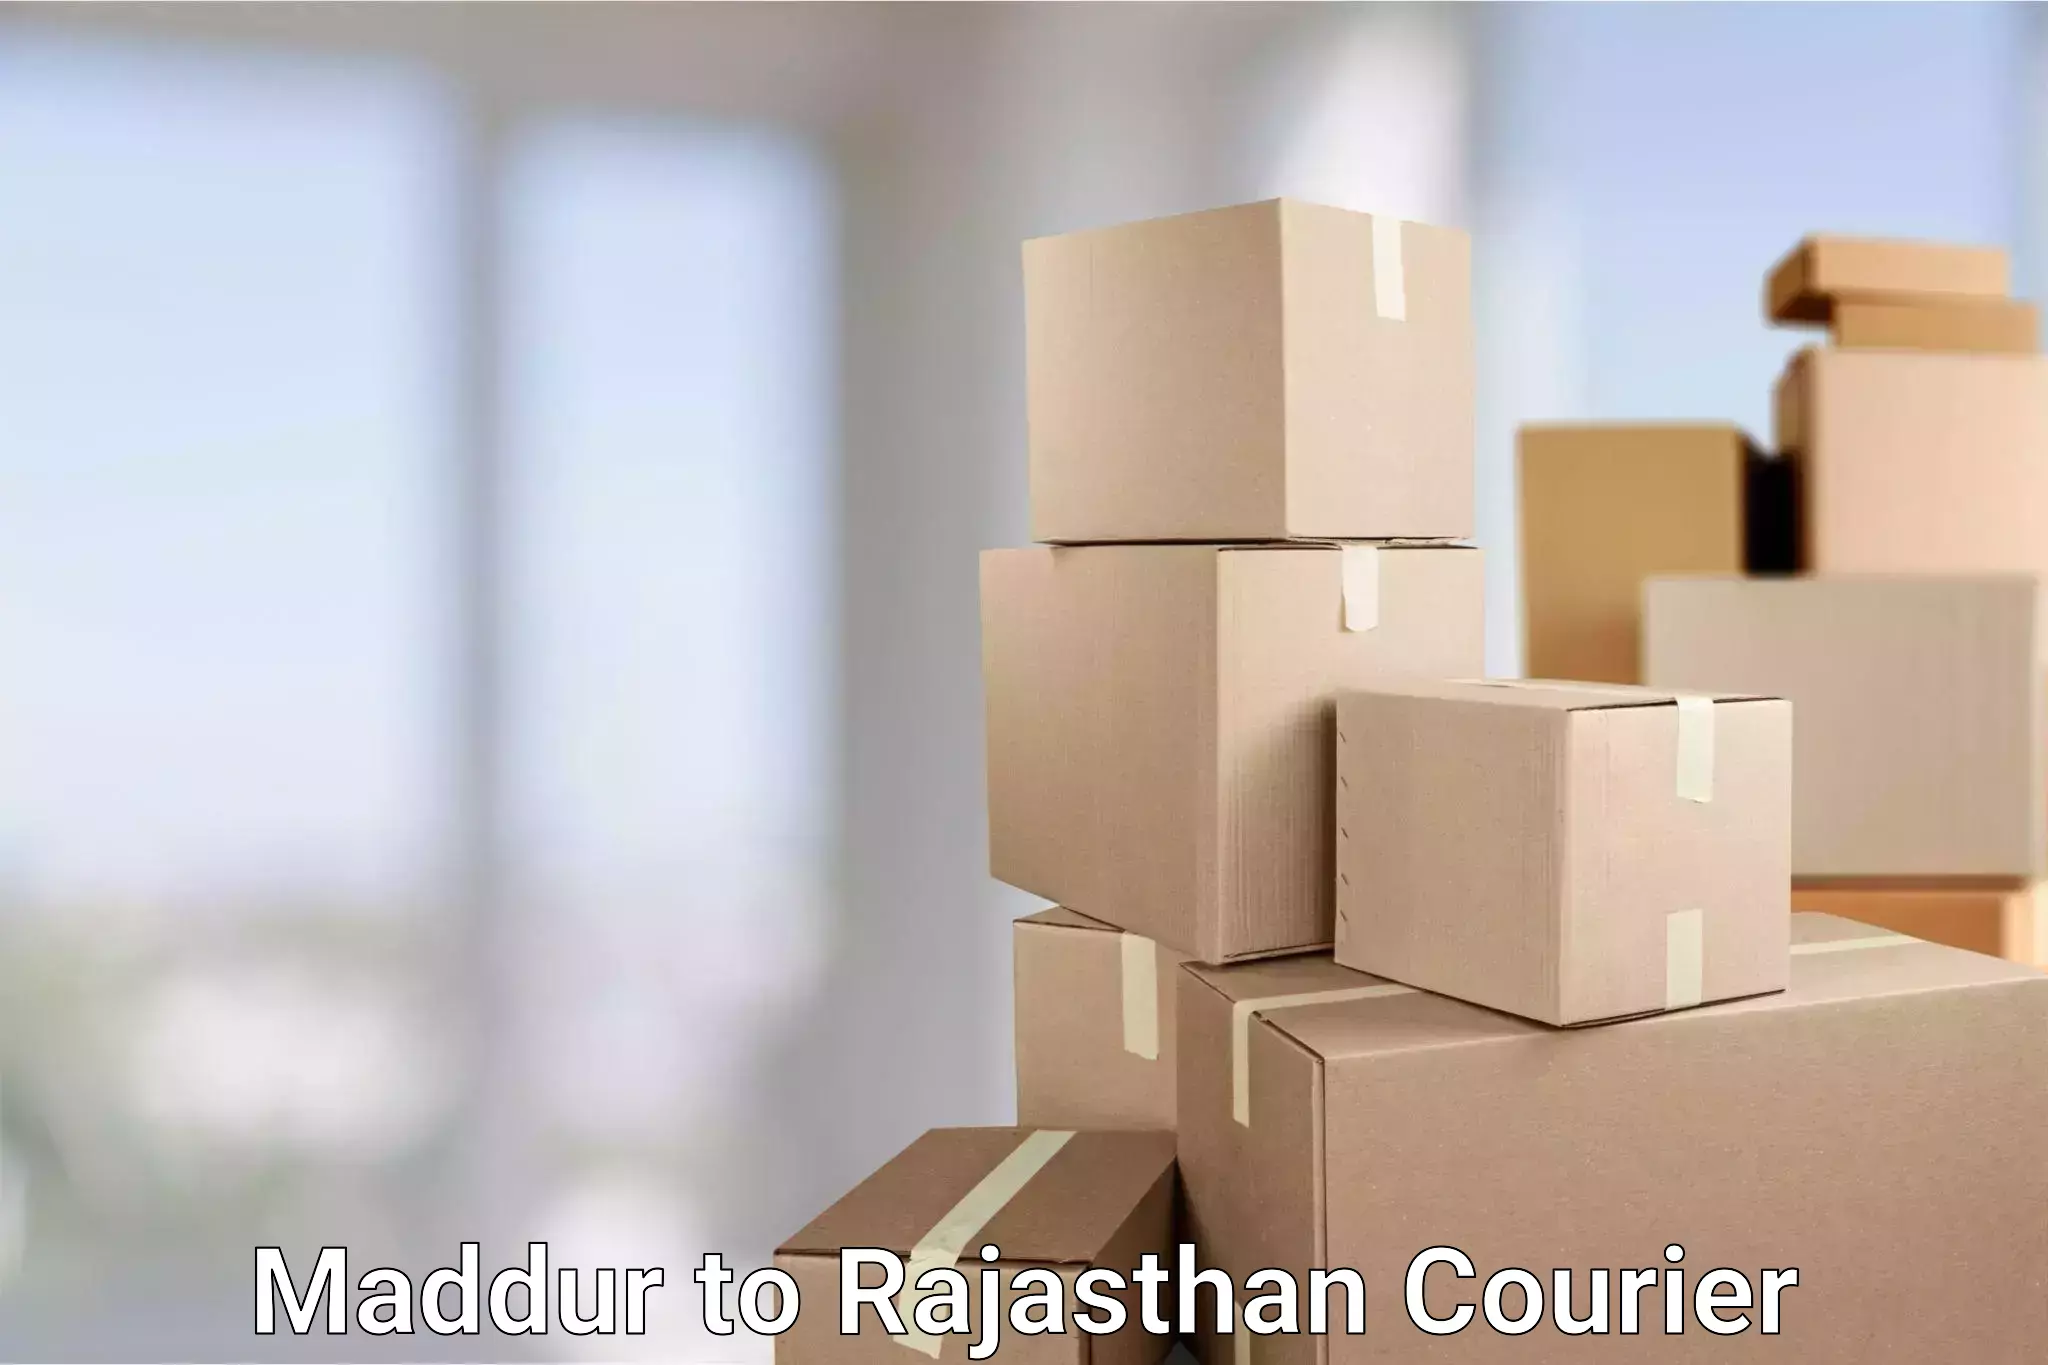 Parcel service for businesses Maddur to Yathalakunta